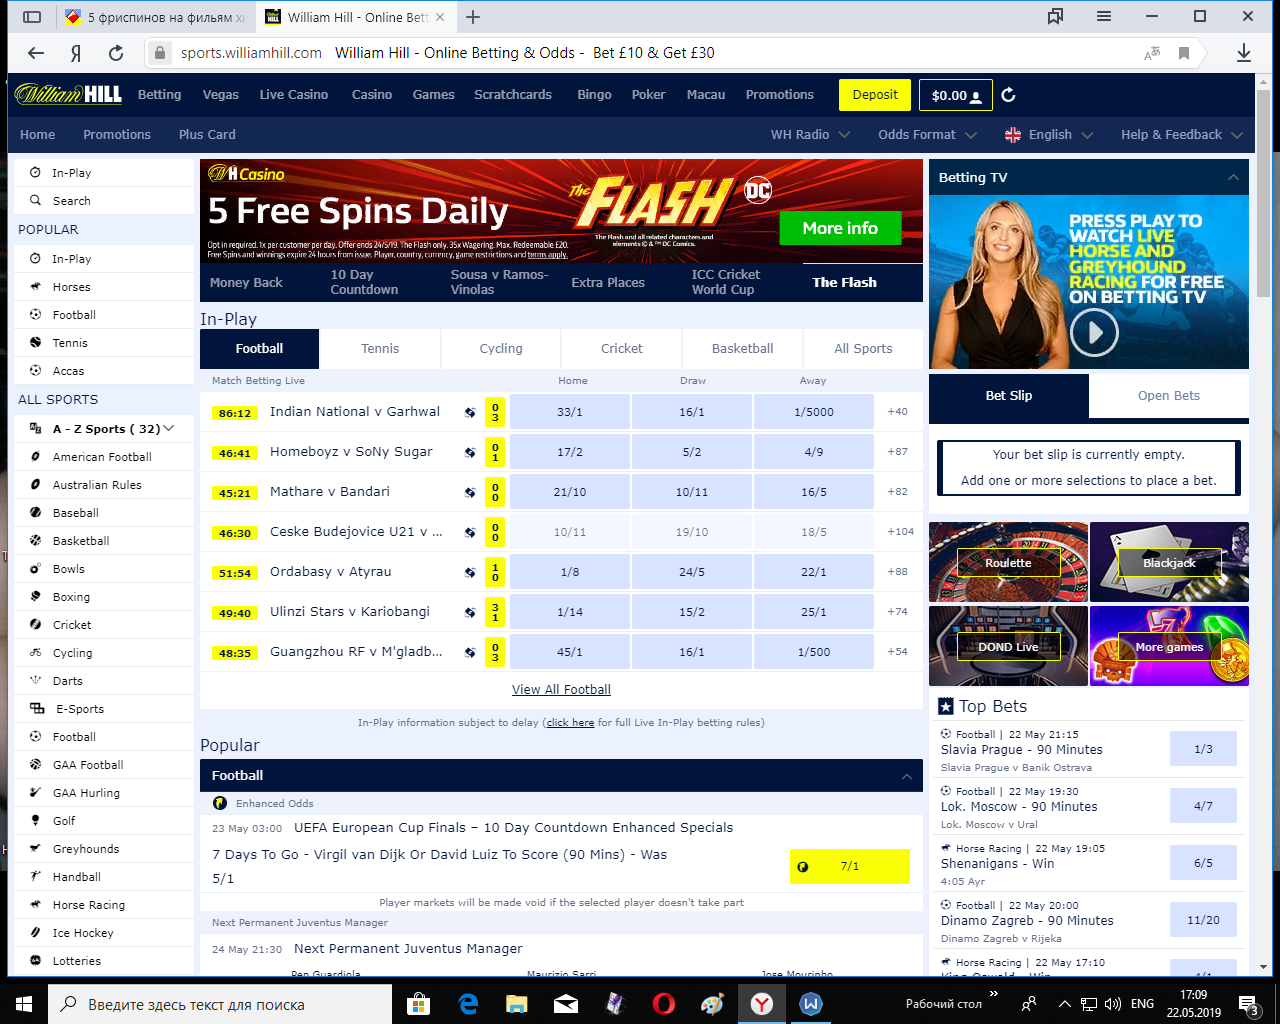 Spread betting forum ftse 350 how to bet on hockey and win